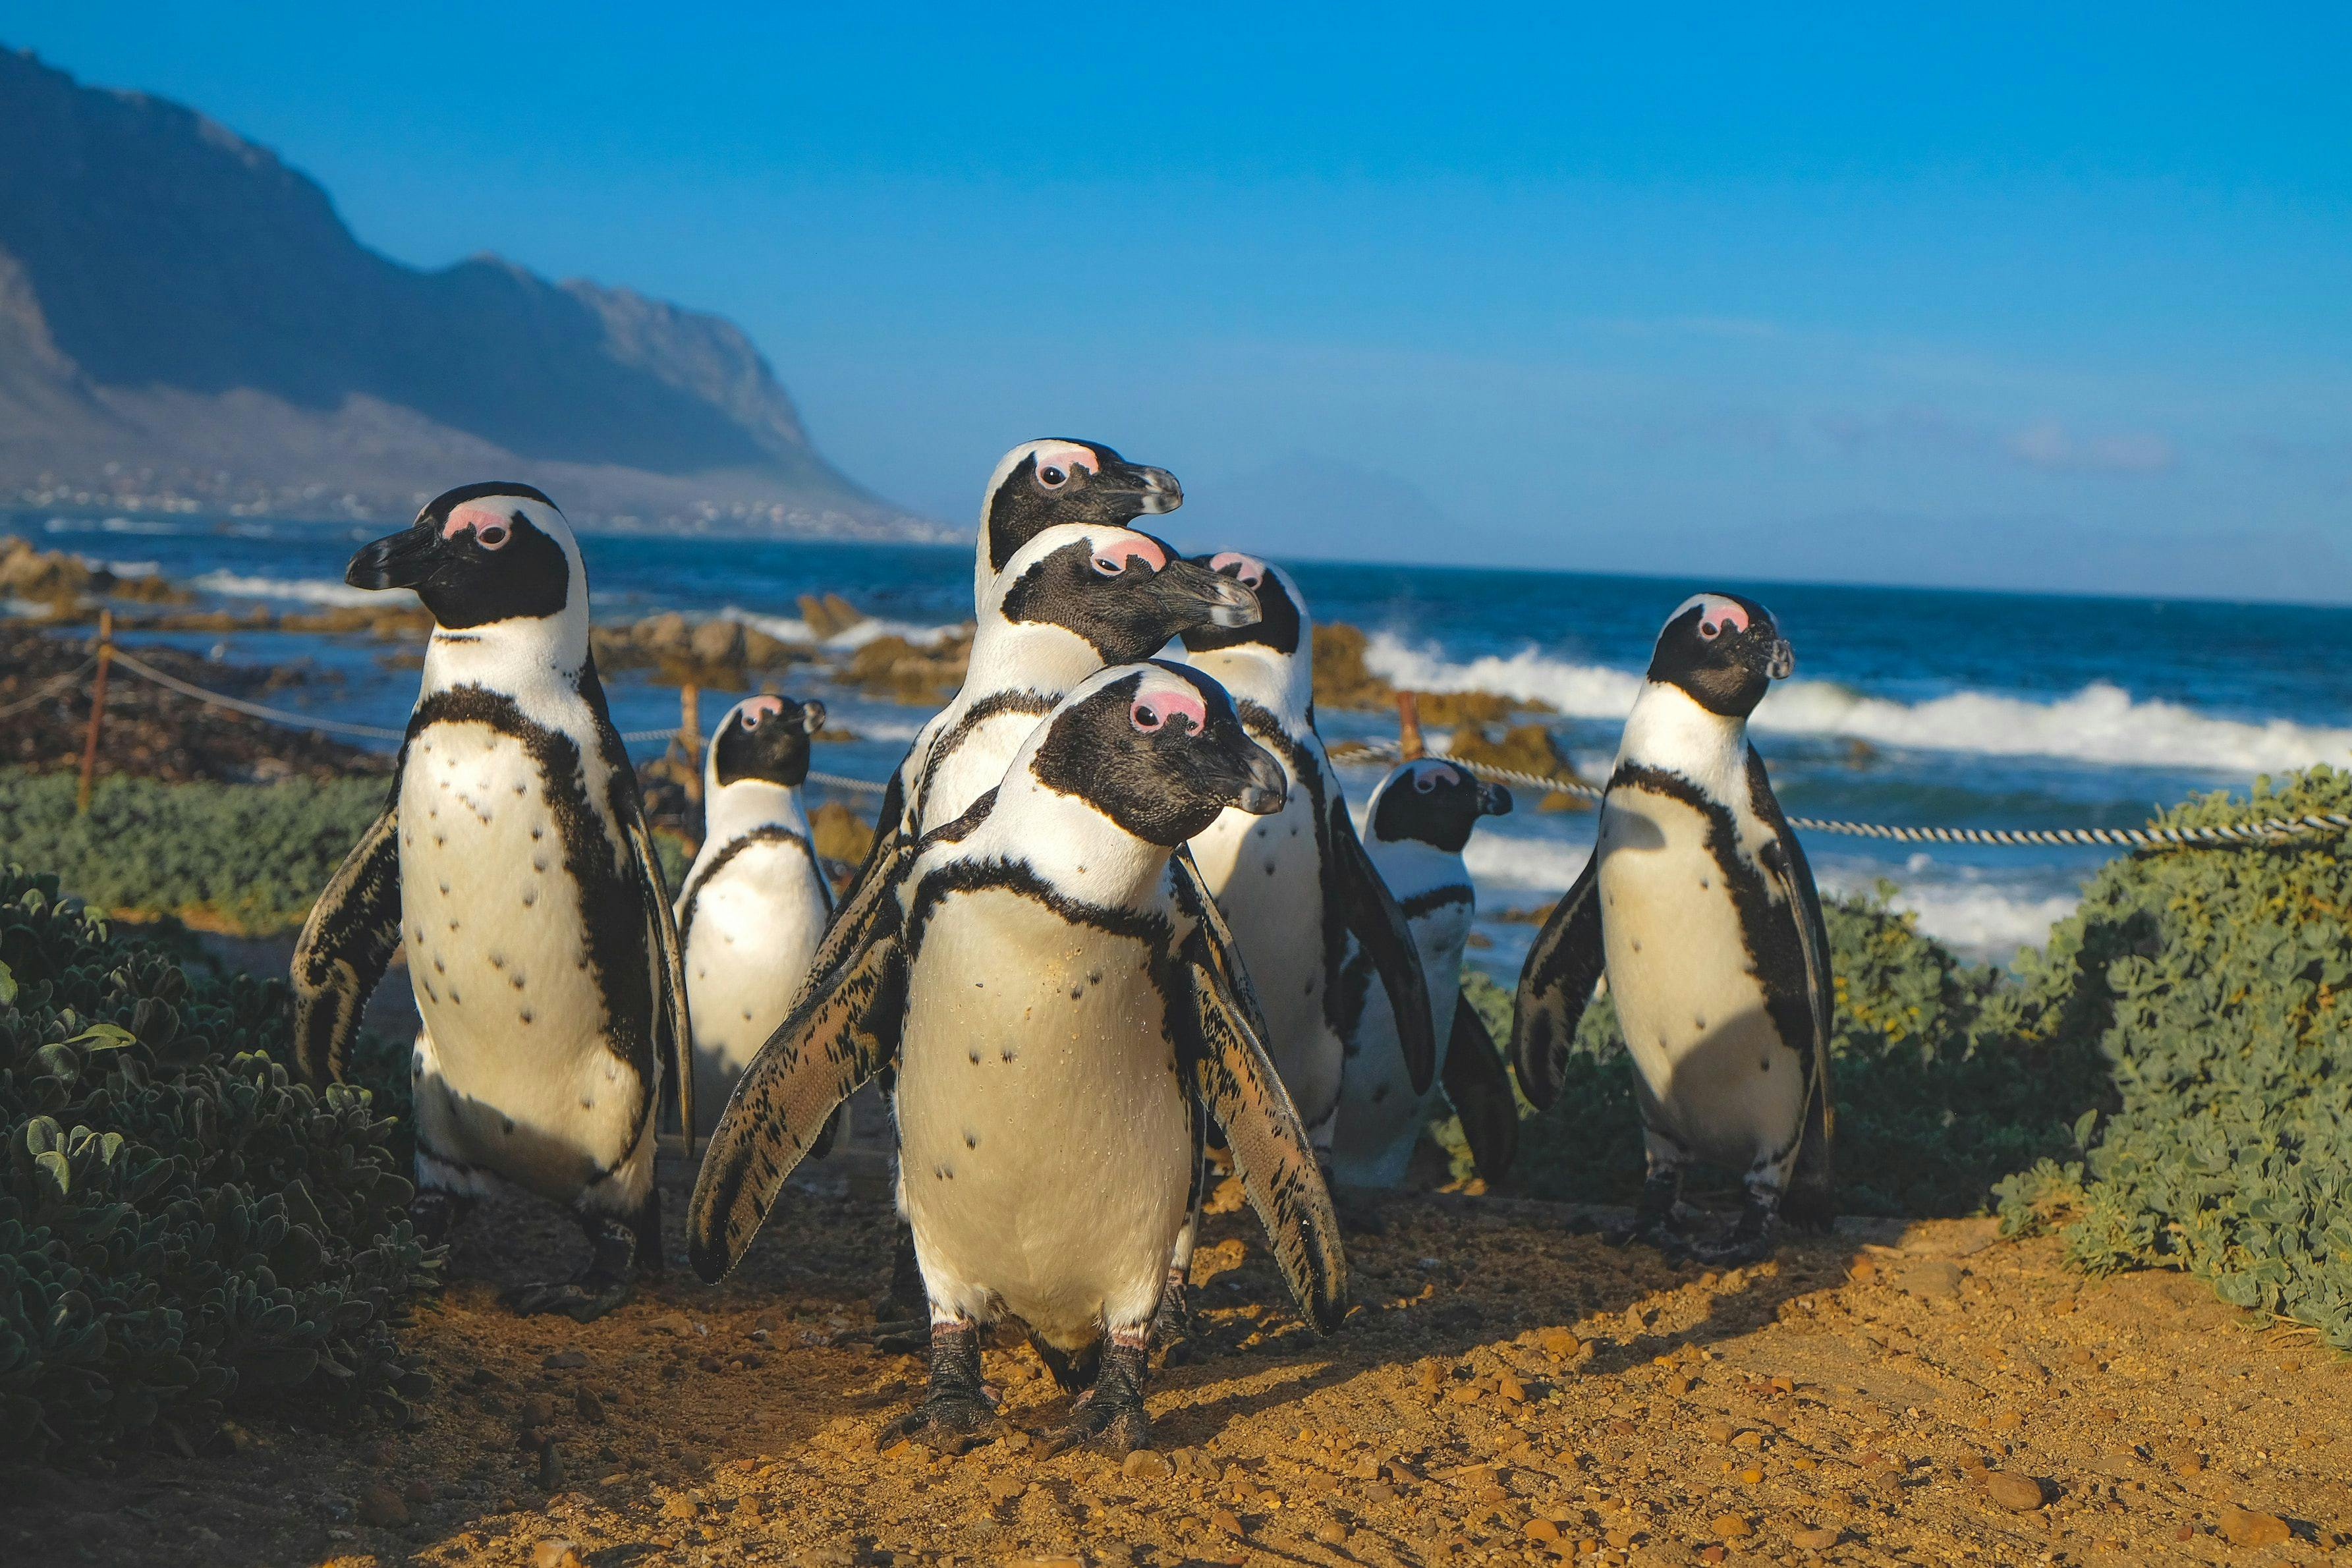 
Betty's Bay penguins in South Africa.